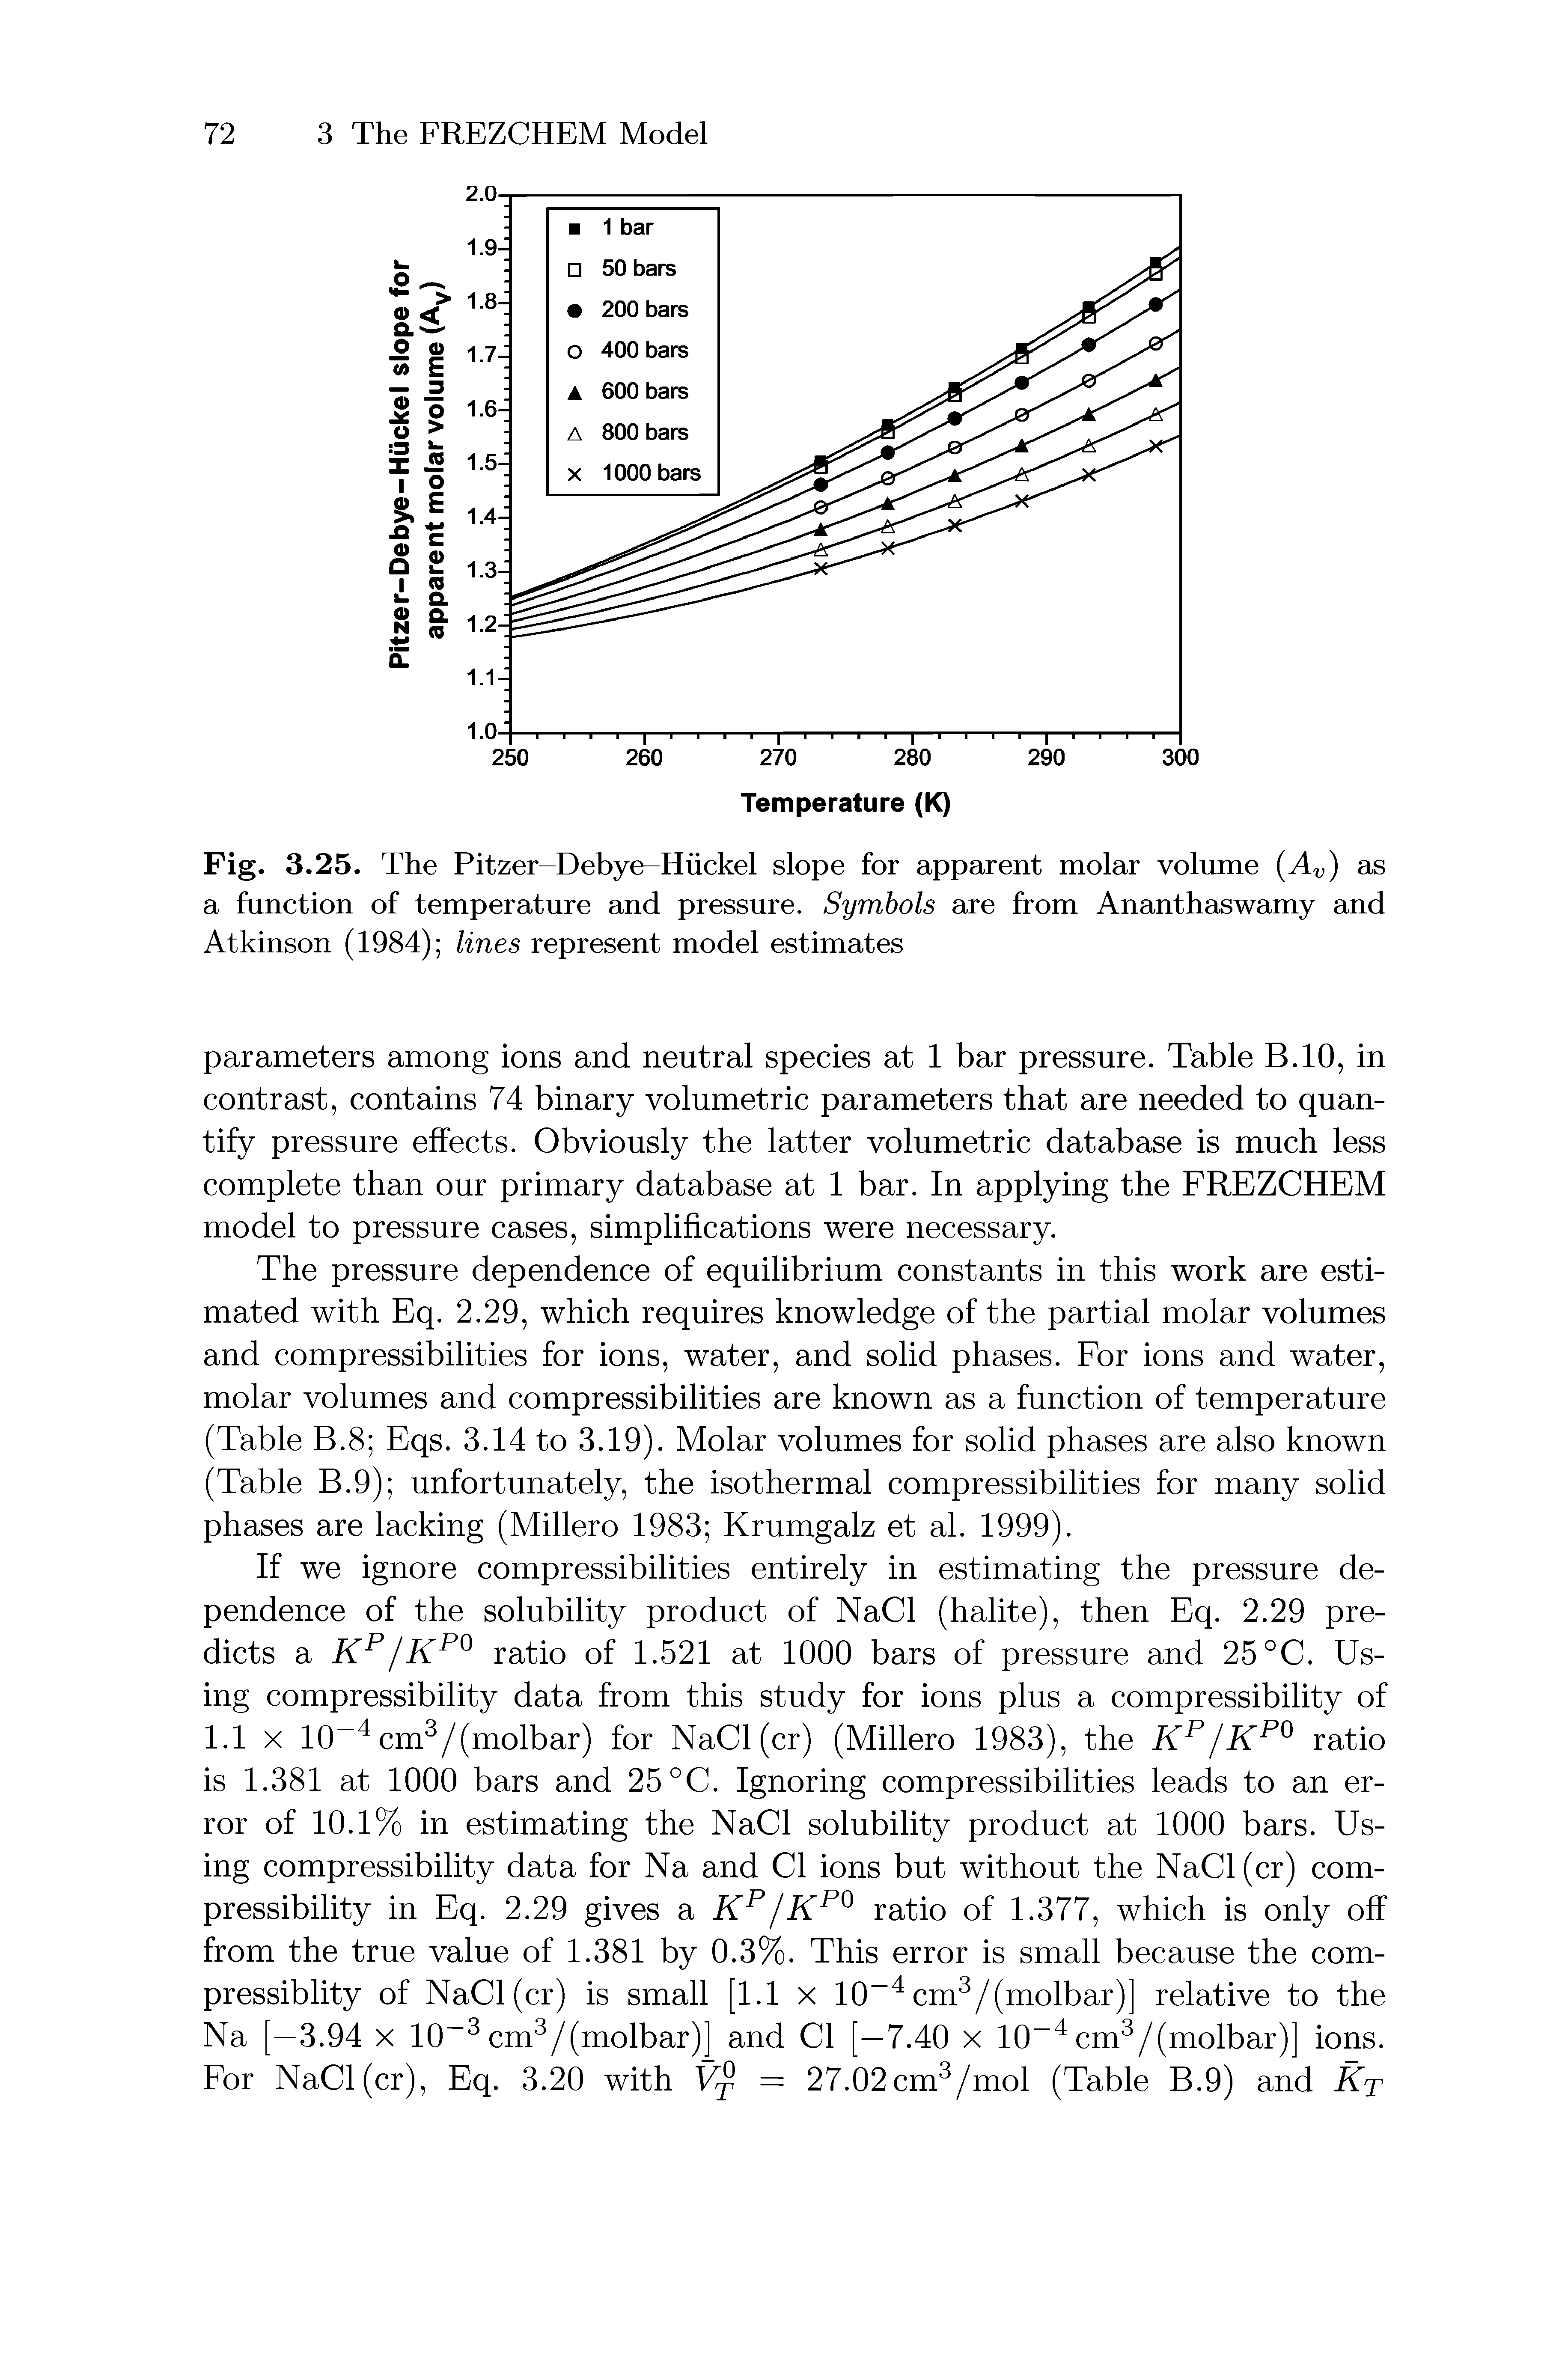 Fig. 3.25. The Pitzer-Debye-Hiickel slope for apparent molar volume (Av) as a function of temperature and pressure. Symbols are from Ananthaswamy and Atkinson (1984) lines represent model estimates...